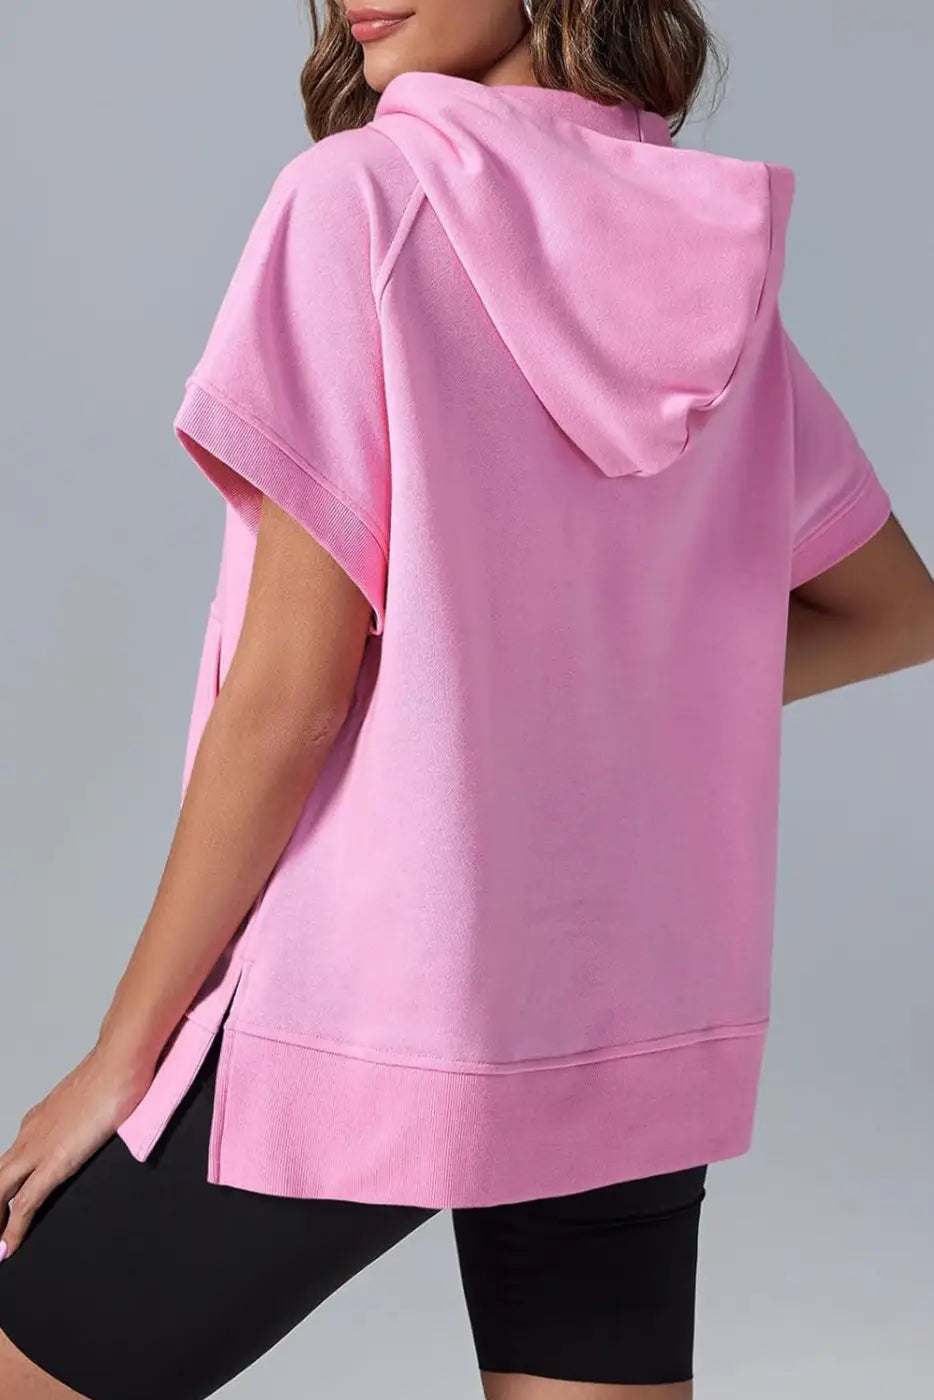 Pink half zip hopper hoodie: relax in style with a hooded short-sleeve sweatshirt and side slits